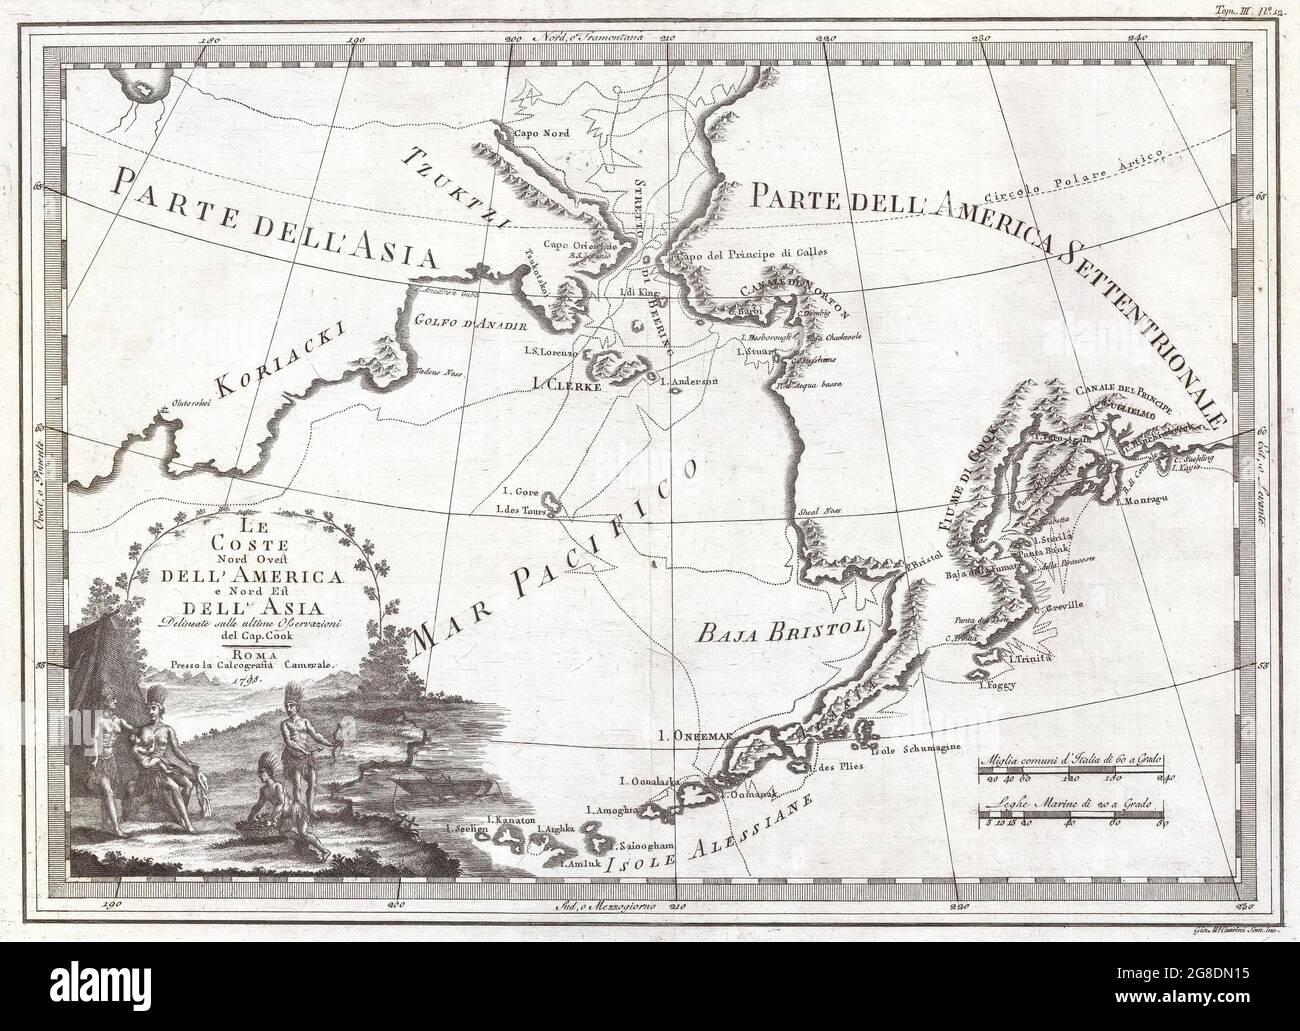 Cassini's 1798 map of Alaska, the Bering Strait, and Siberia. Cassini issued this map in his 1798 atlas to illustrate the discoveries made by James Cook. Stock Photo